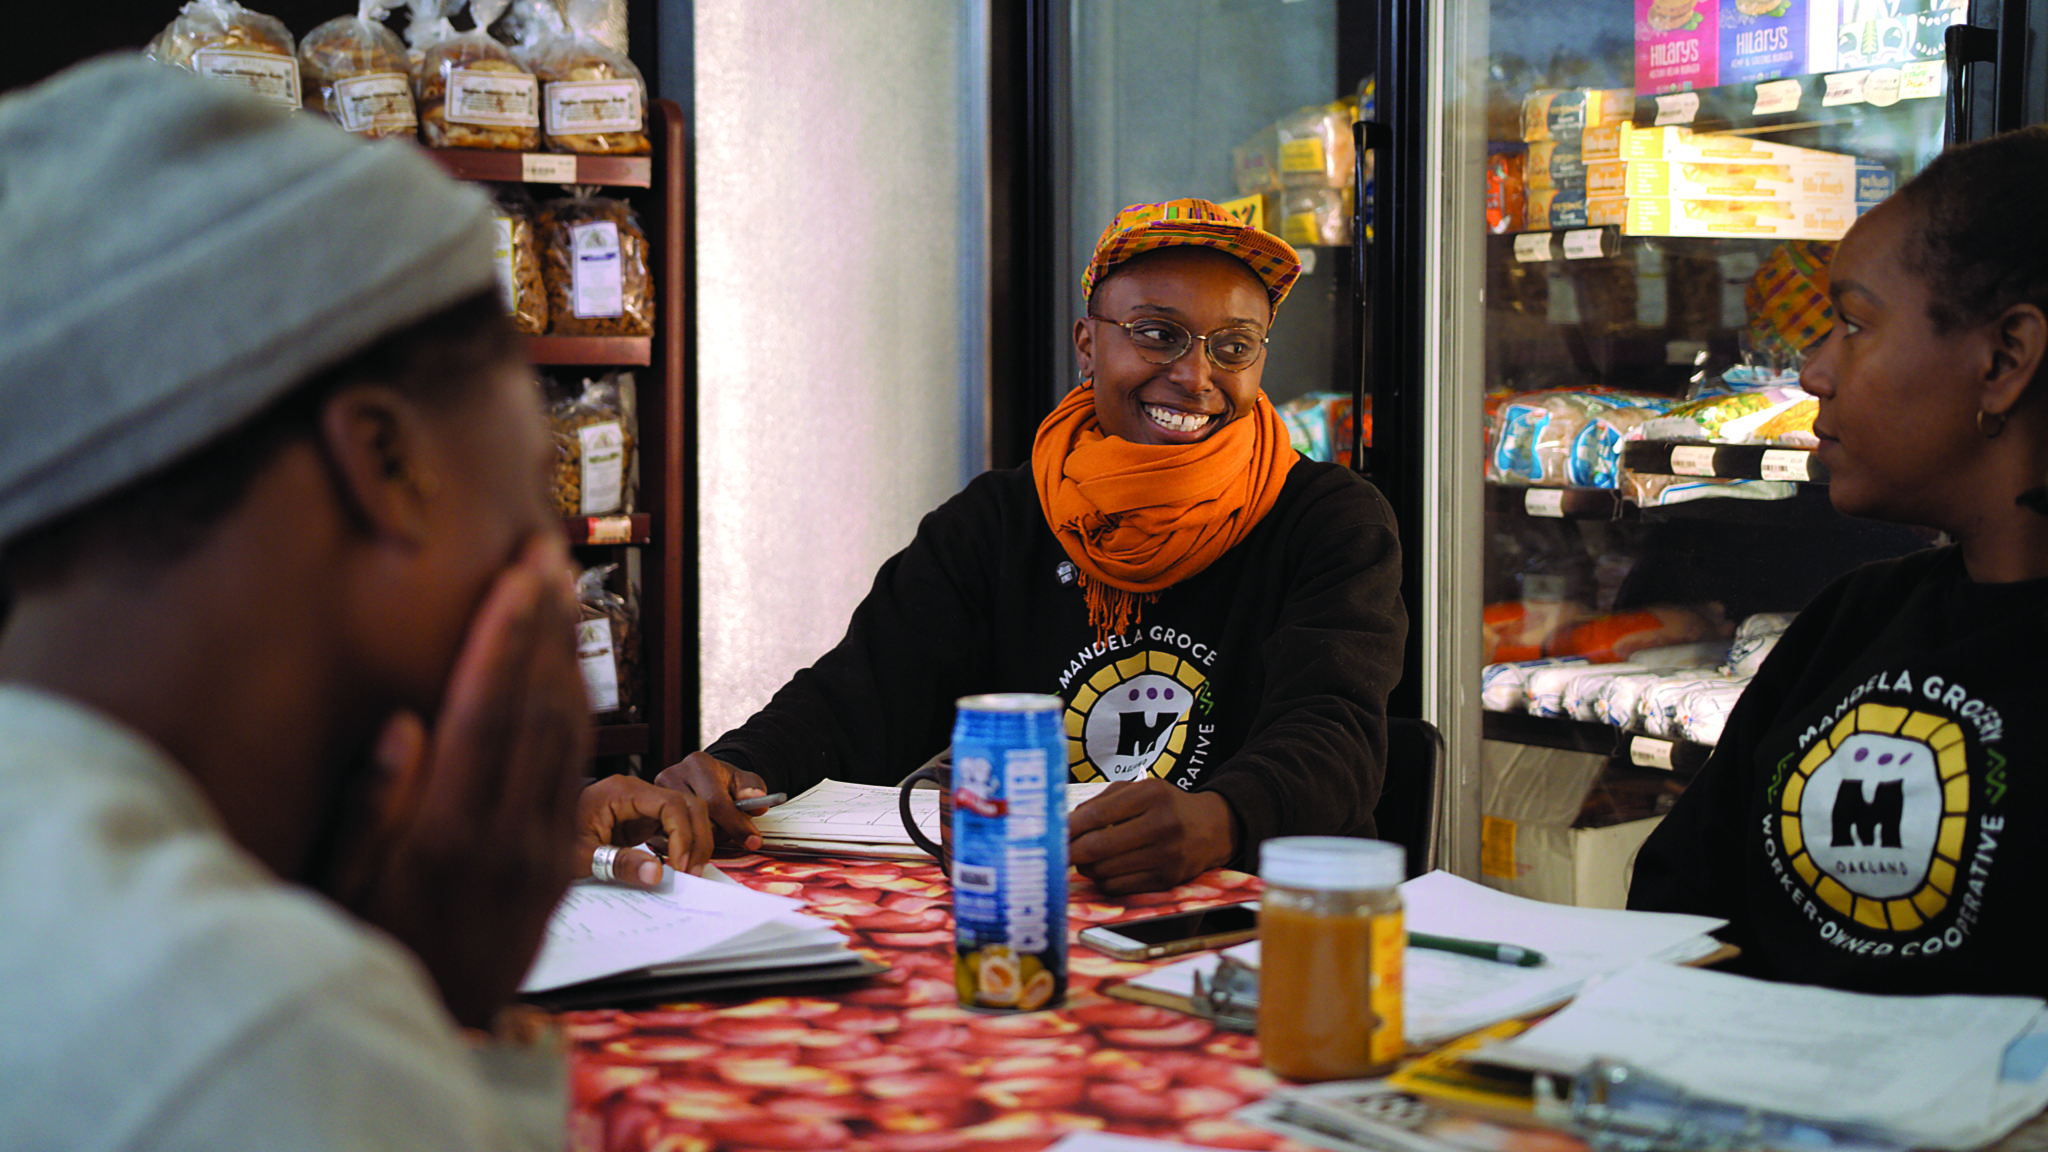 Adrionna Fike of Mandela Grocery Cooperative. Photo by Fabián Aguirre.